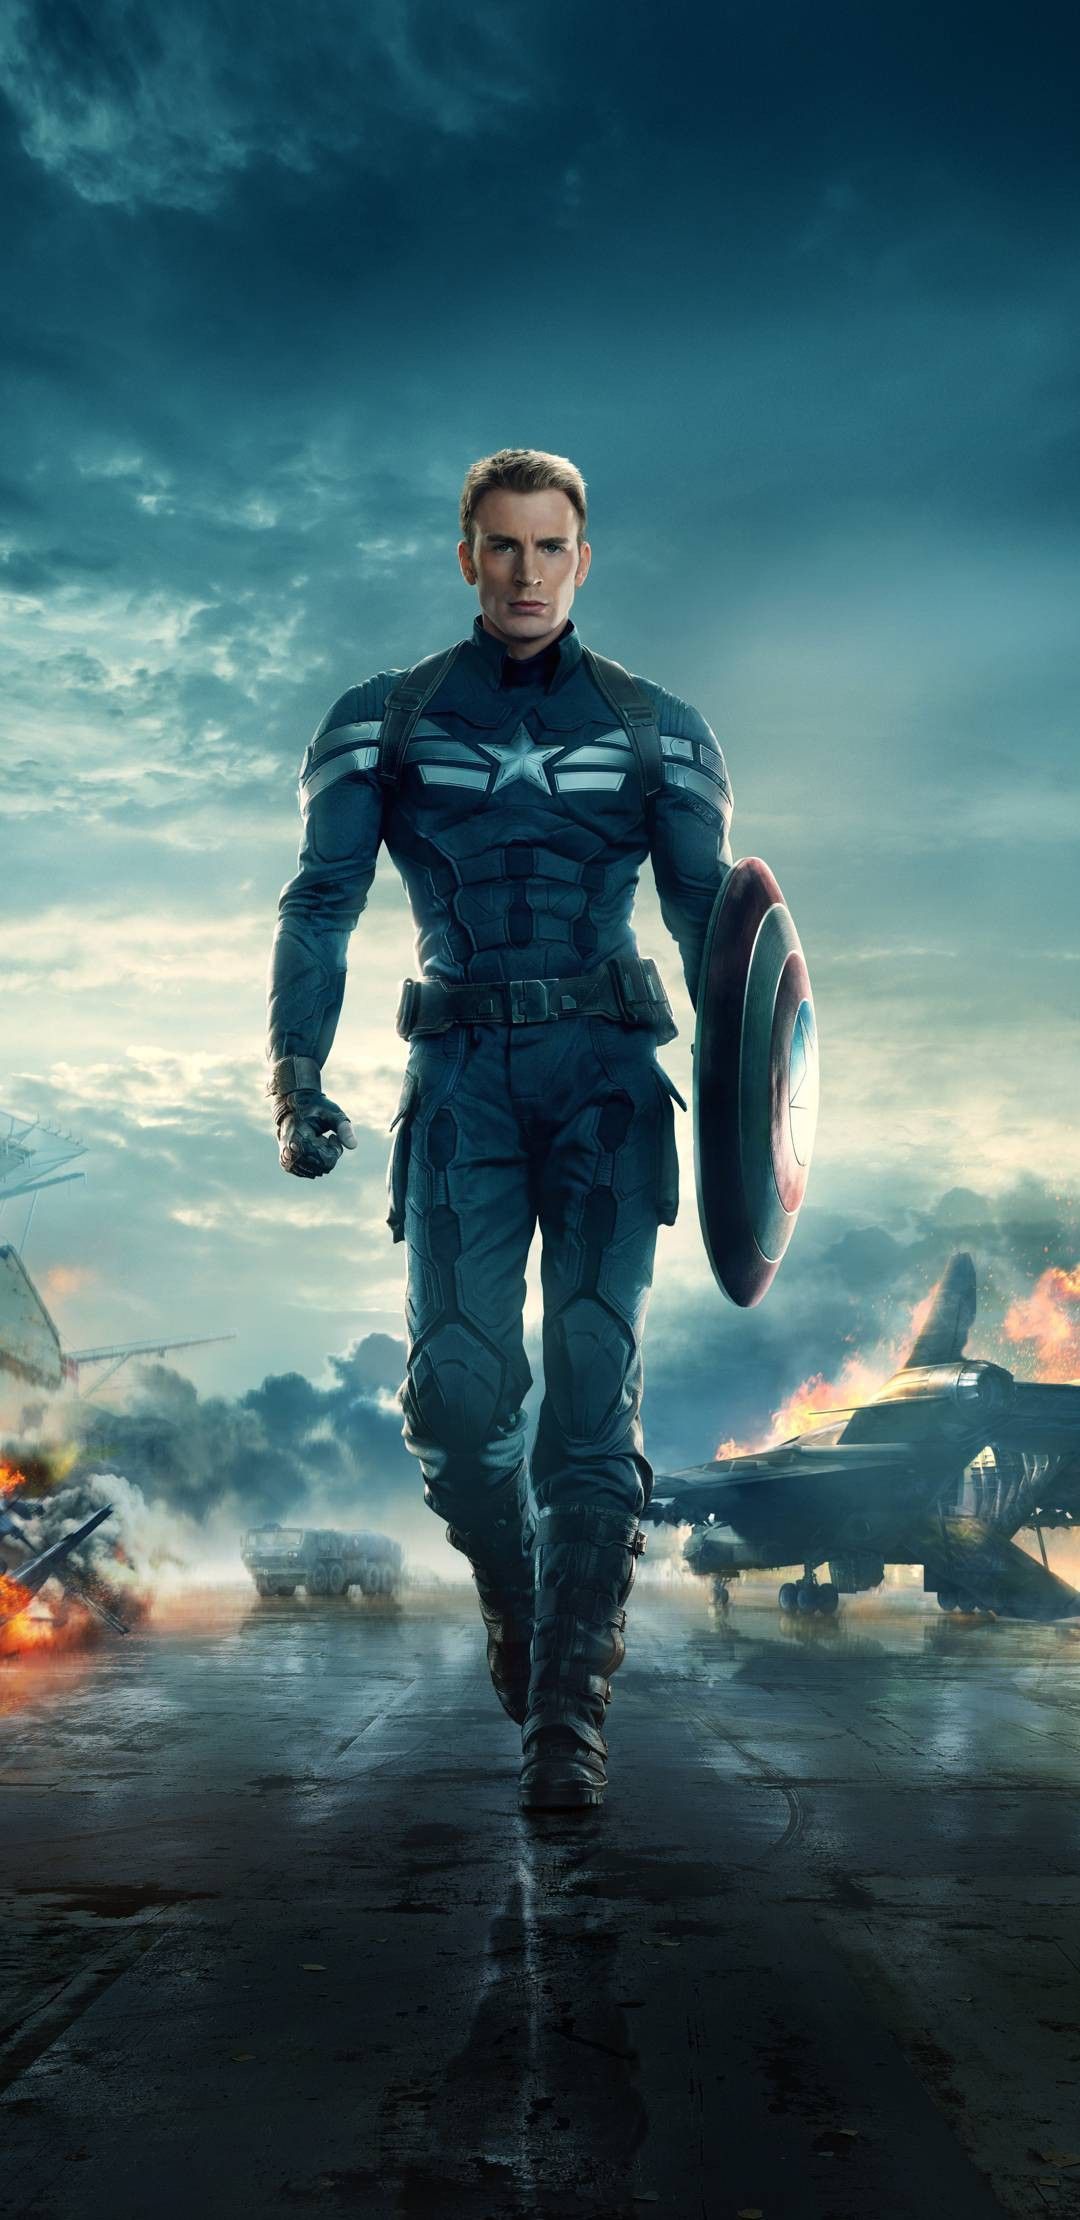 Captain America: The Winter Solider textless wallpaper. Captain america wallpaper, Captain america poster, Captain america comic